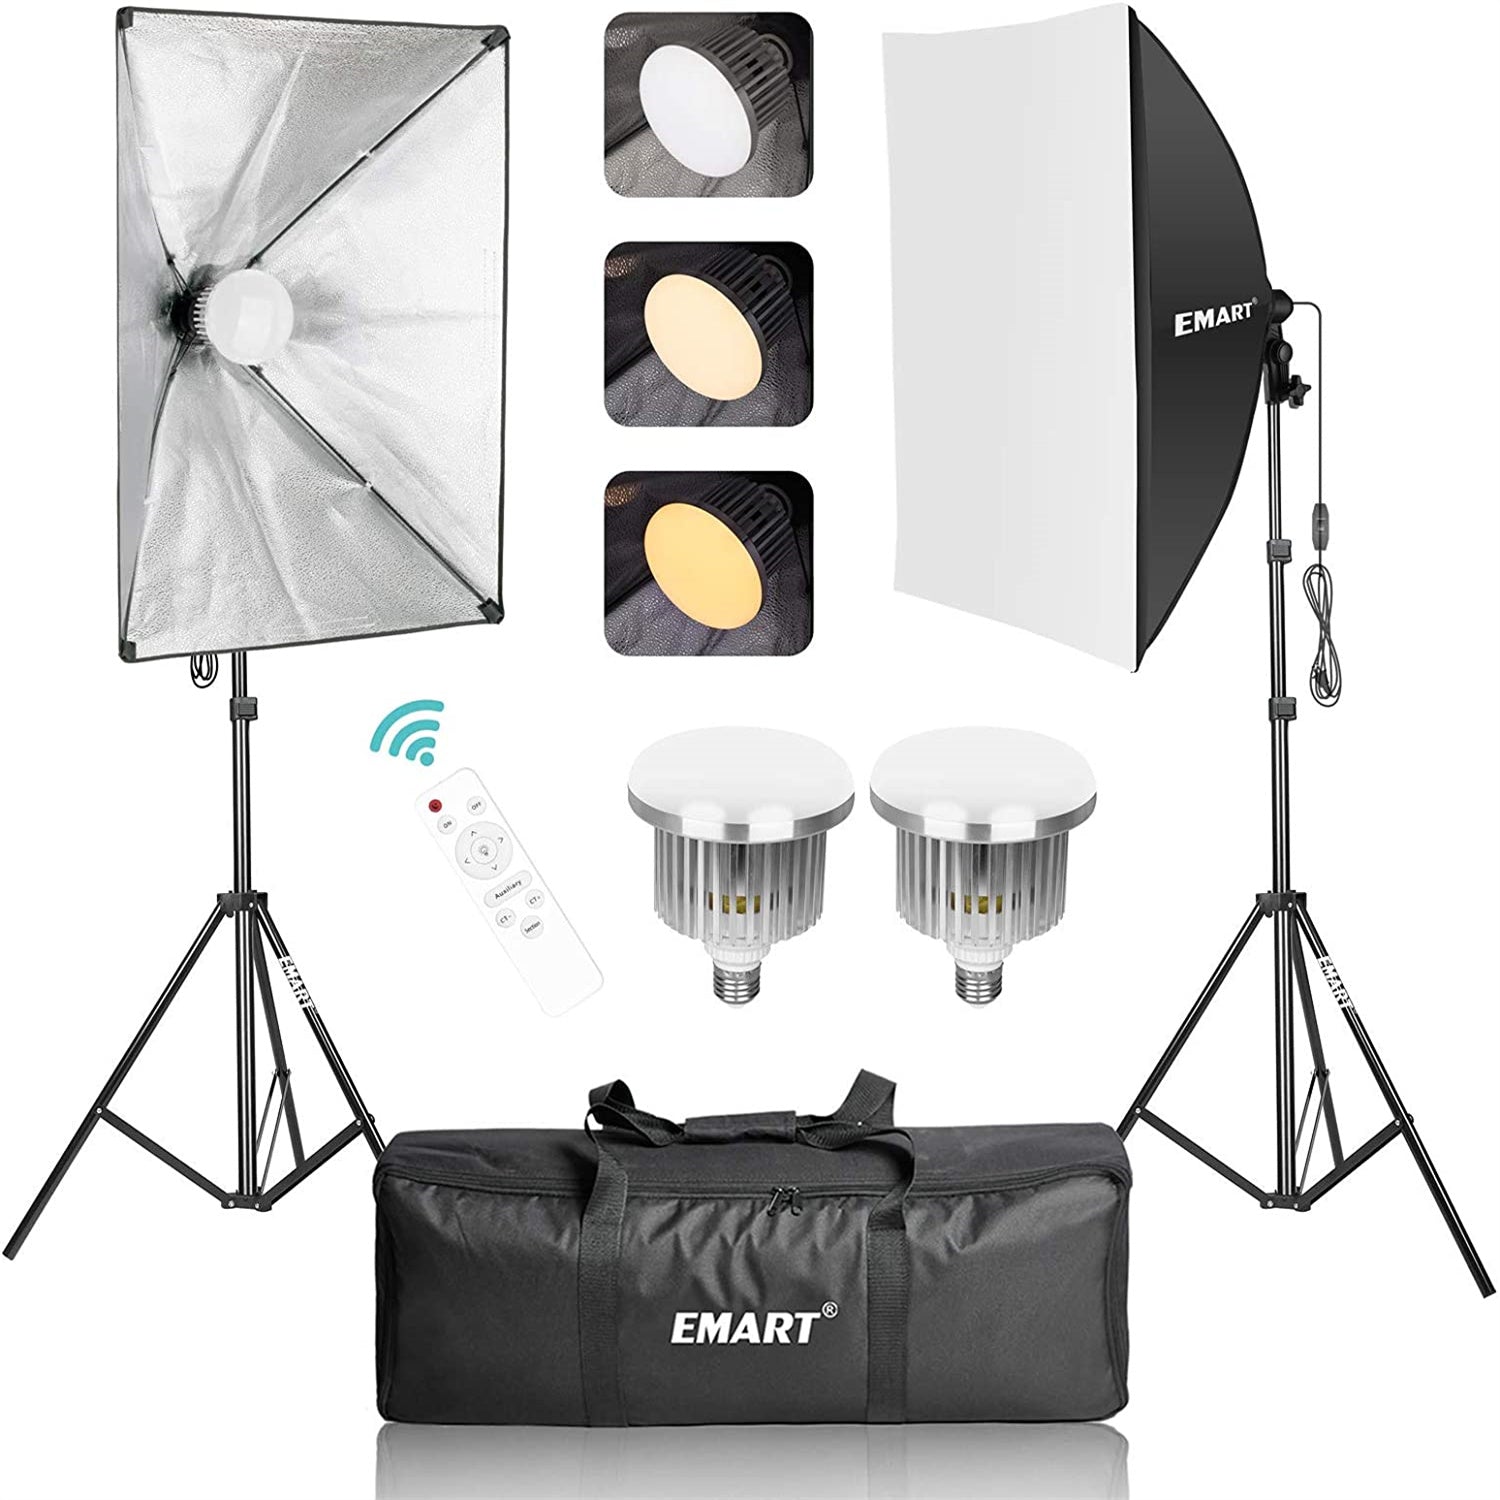 EMART Softbox Lighting Kit, Dimmable Continuous Lighting Soft Box Set with 3 Color Temperature 45W Light Bulbs - EMART INTERNATIONAL, INC (Official Website)